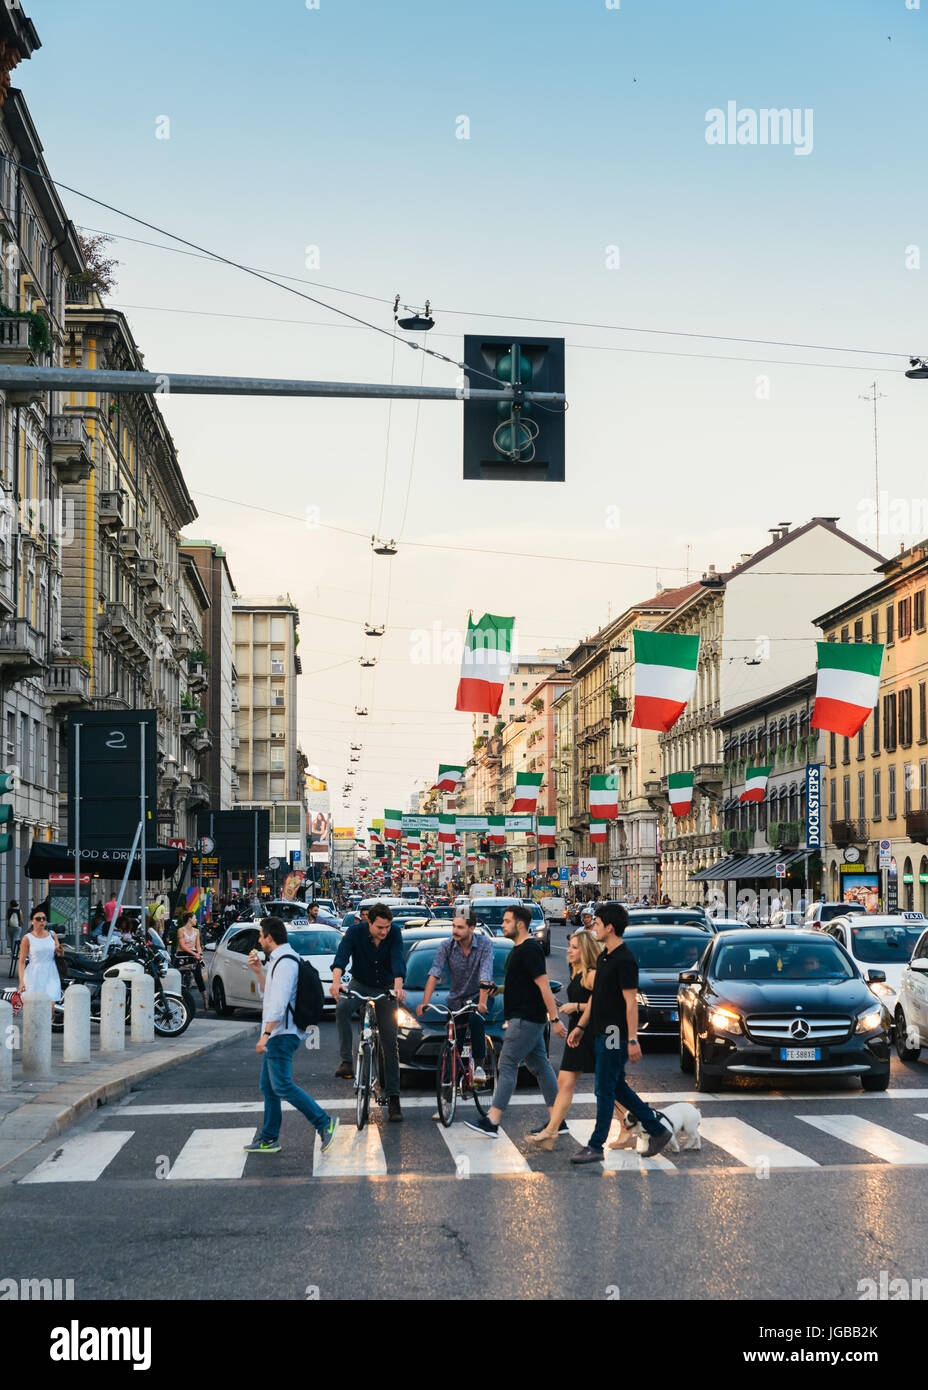 Milan, Italy - July 4th, 2017: Italian flags line up on Corso Buenos Aires street Milan Lombardy region Italy Europe, a busy shopping street Stock Photo